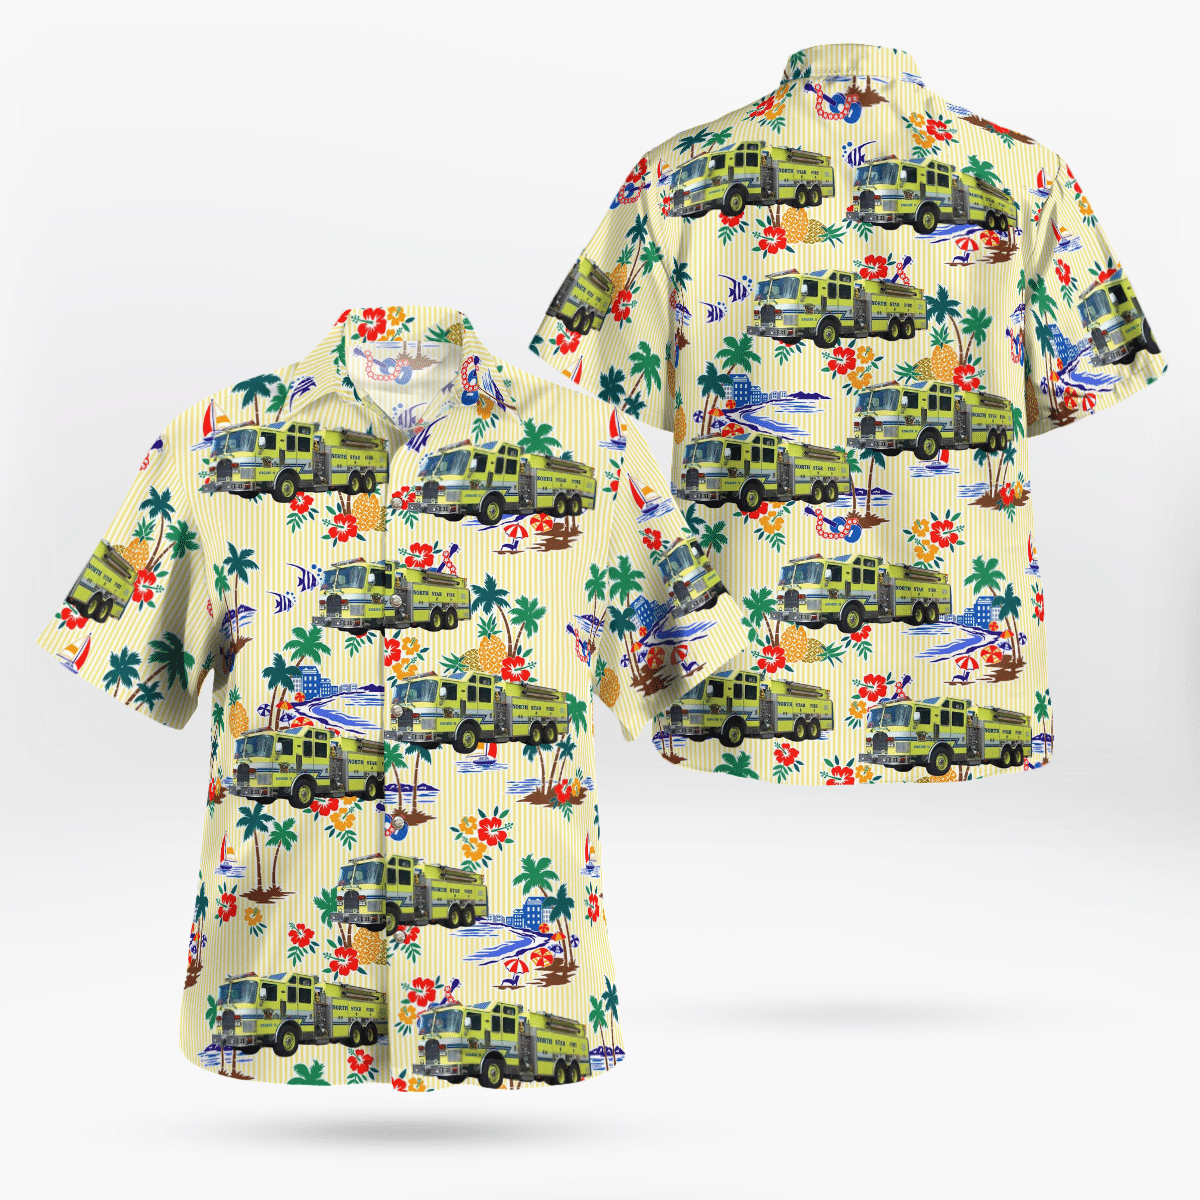 If you want to be noticed, wear These Trendy Hawaiian Shirt 118